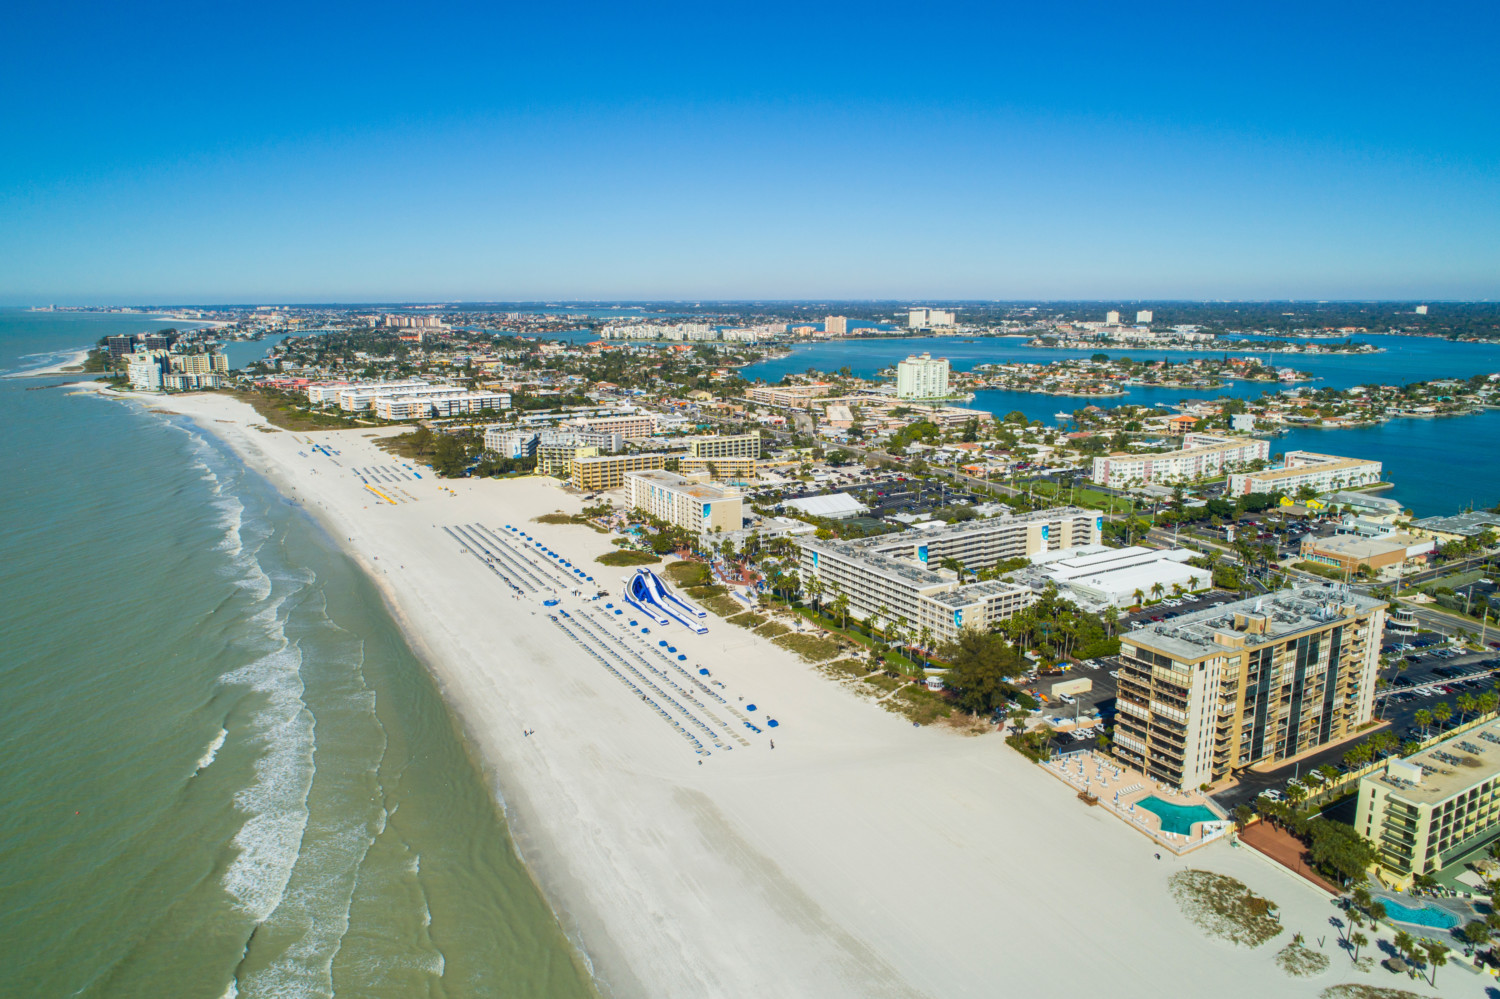 Aerial image of resorts on St Pete Beach, Florida.